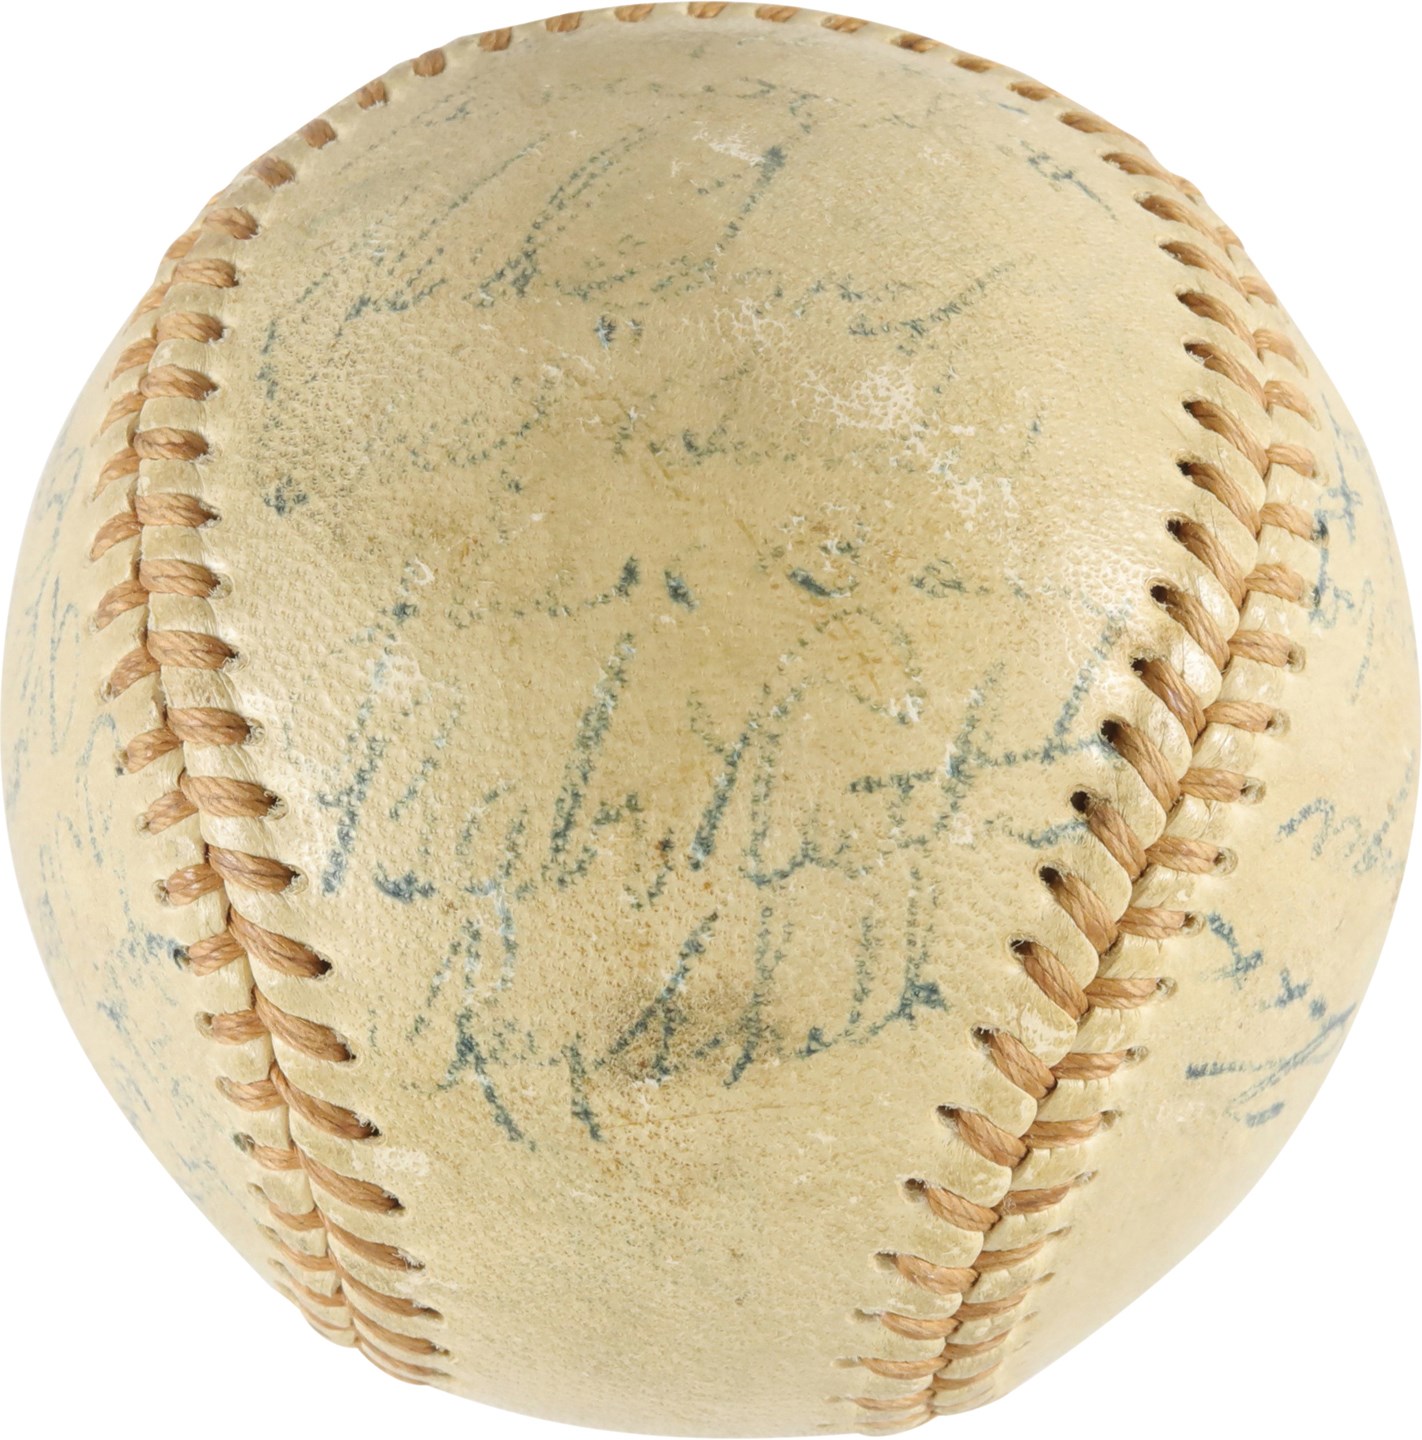 - Extraordinary 1947 New York Yankees Inaugural Old Timers Day Signed Baseball - 32 Signatures with 18 Hall of Famers including Ruth, Cobb, Foxx & Young (PSA)